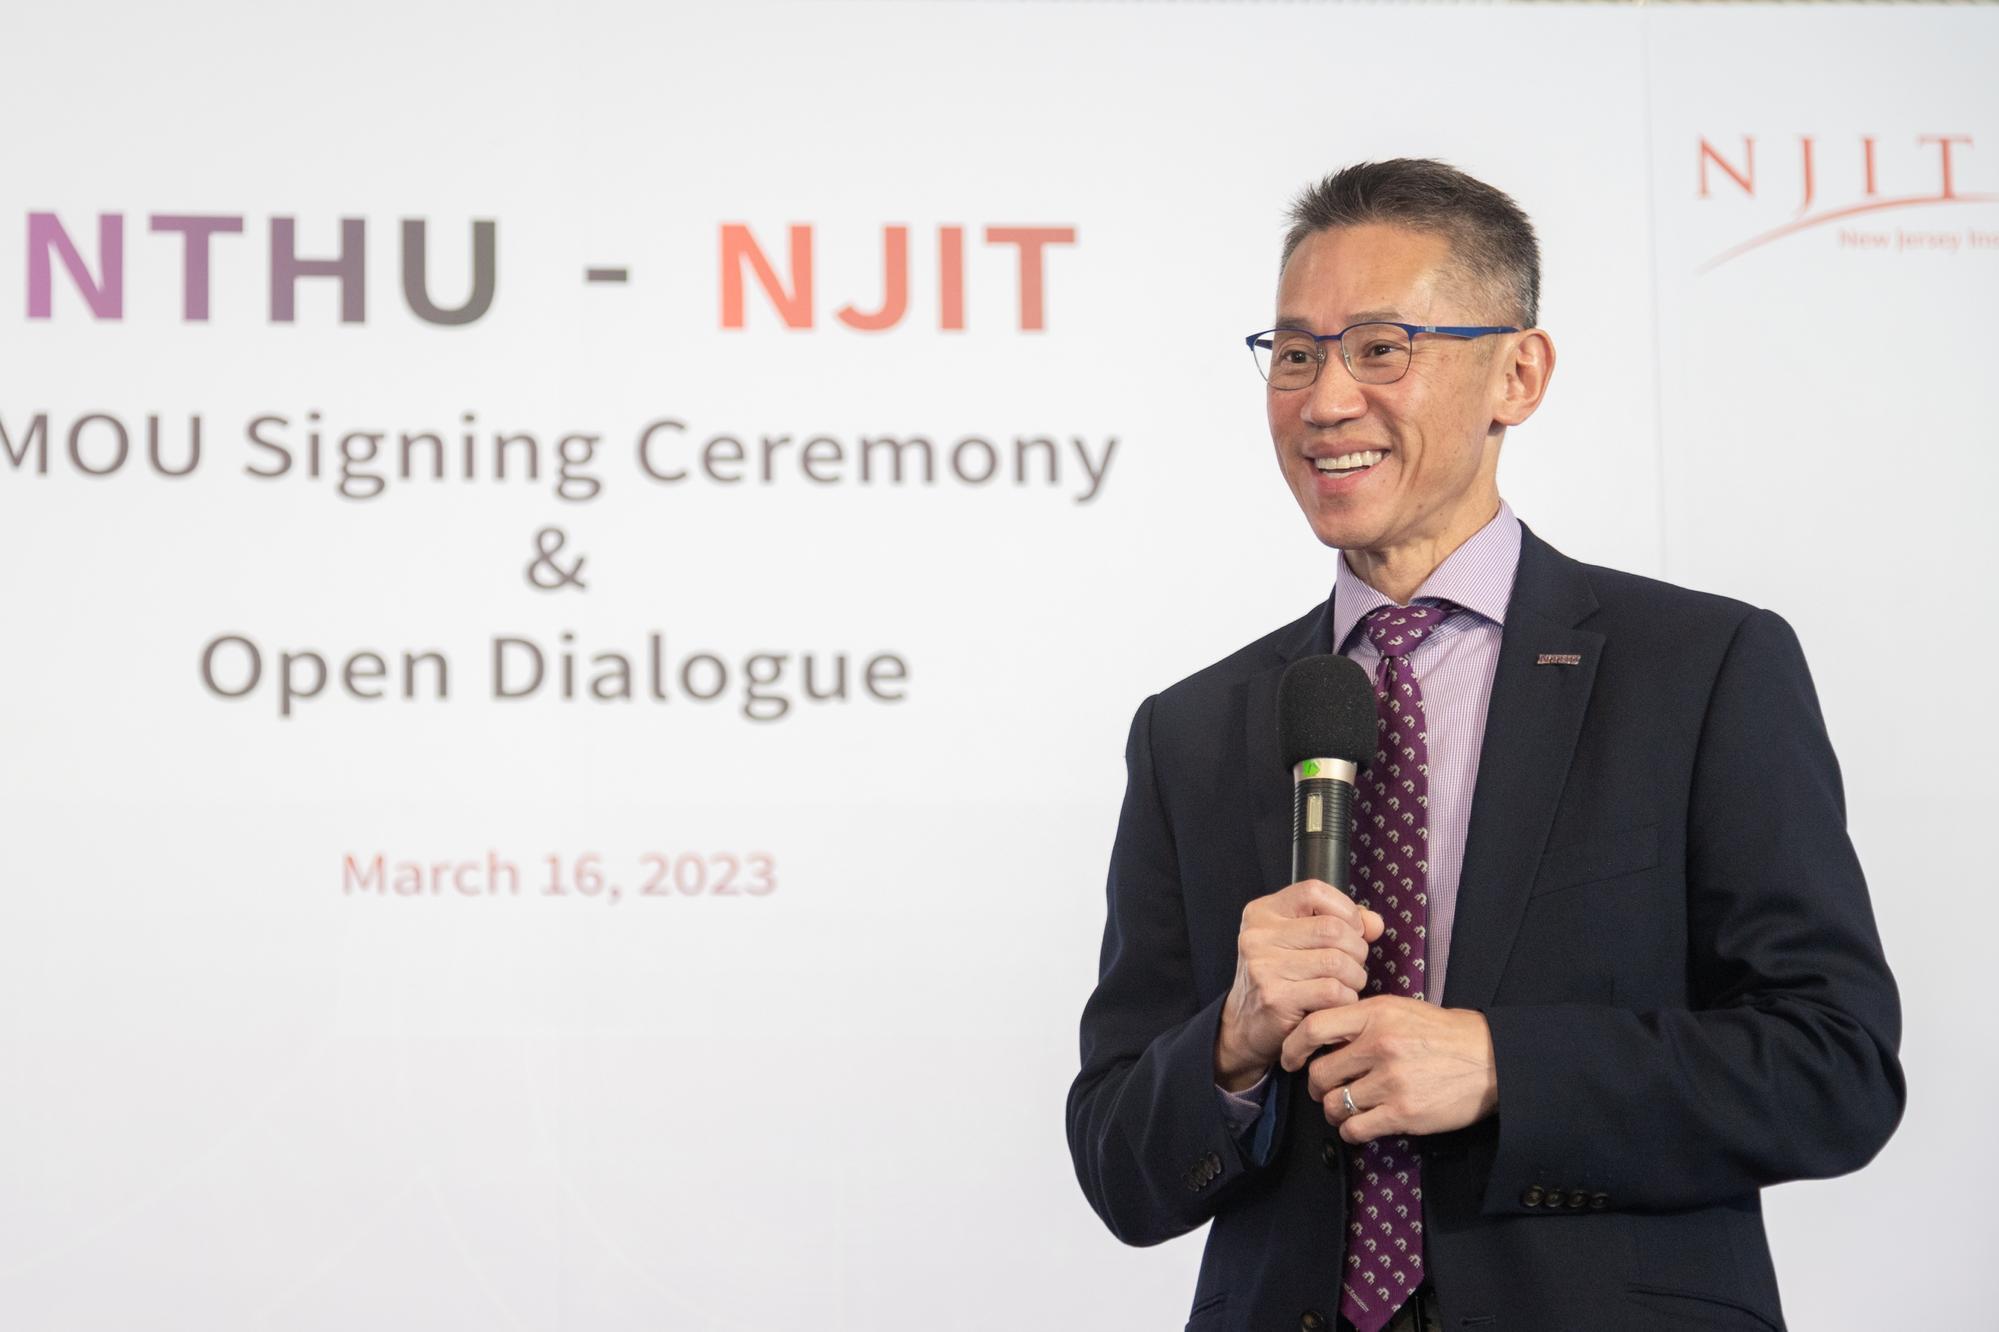 Kao said that one of NTHU's key development strategies is to encourage students to attain cross-disciplinary expertise.